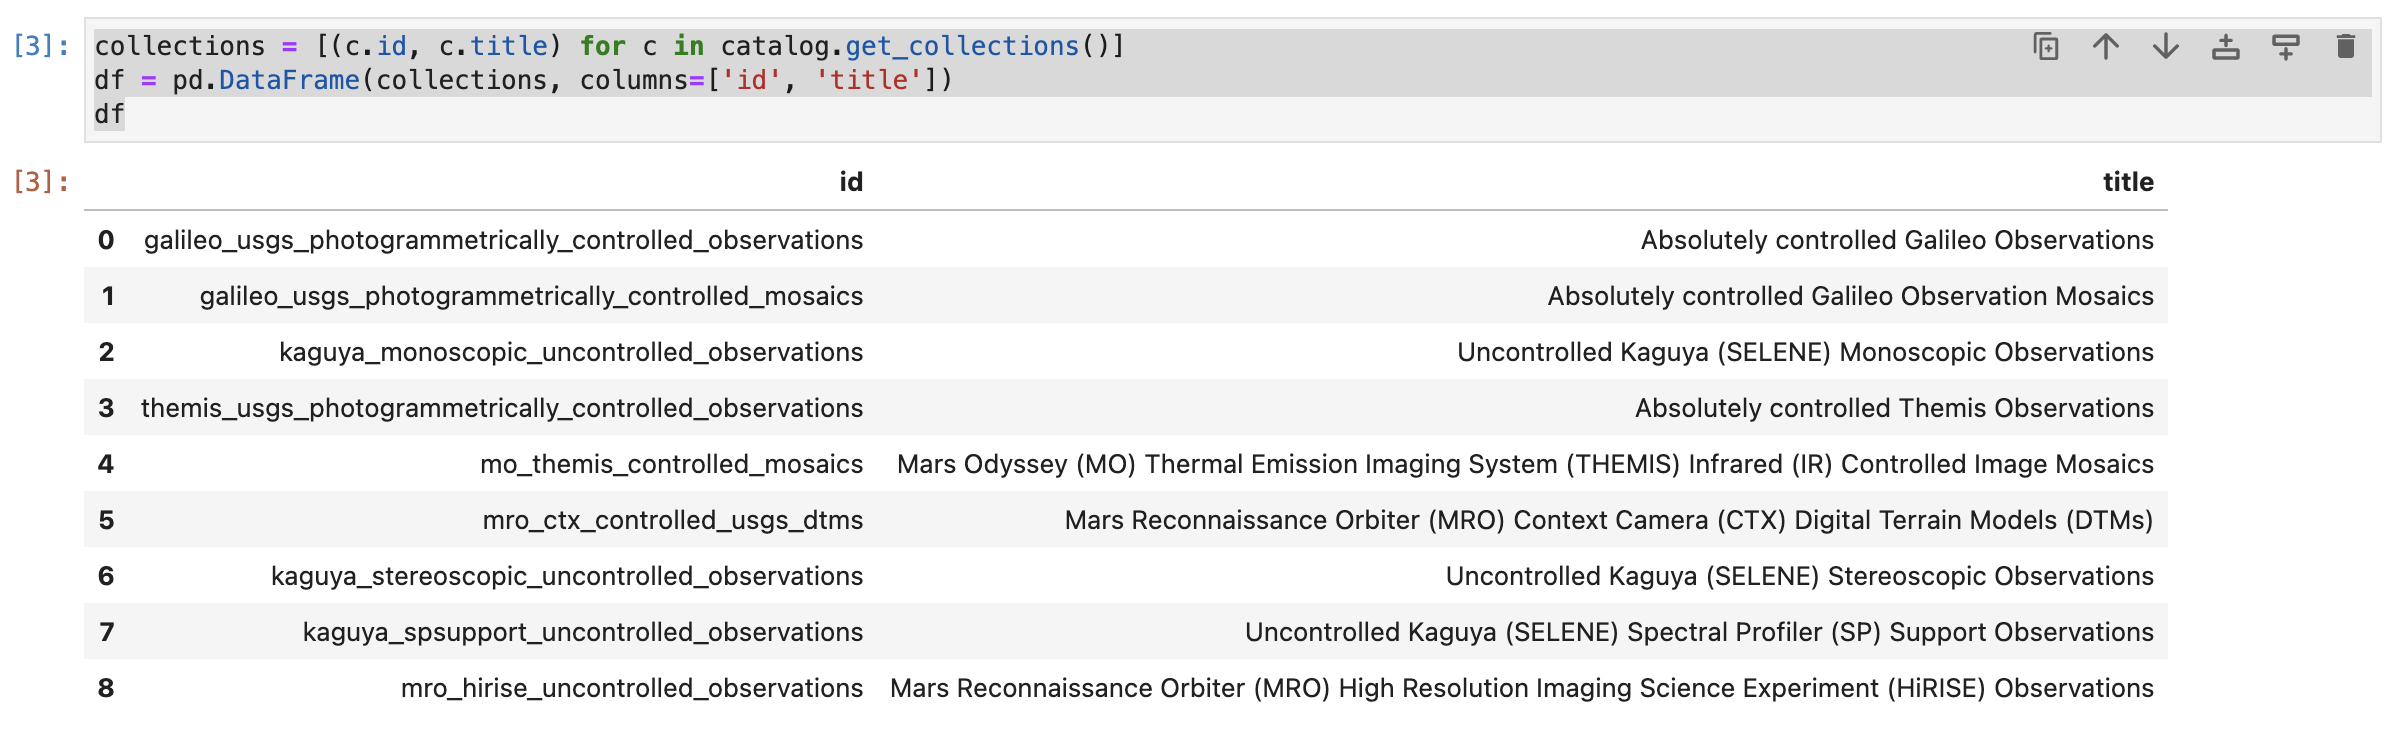 A PNG showing the collections advertised by the API.